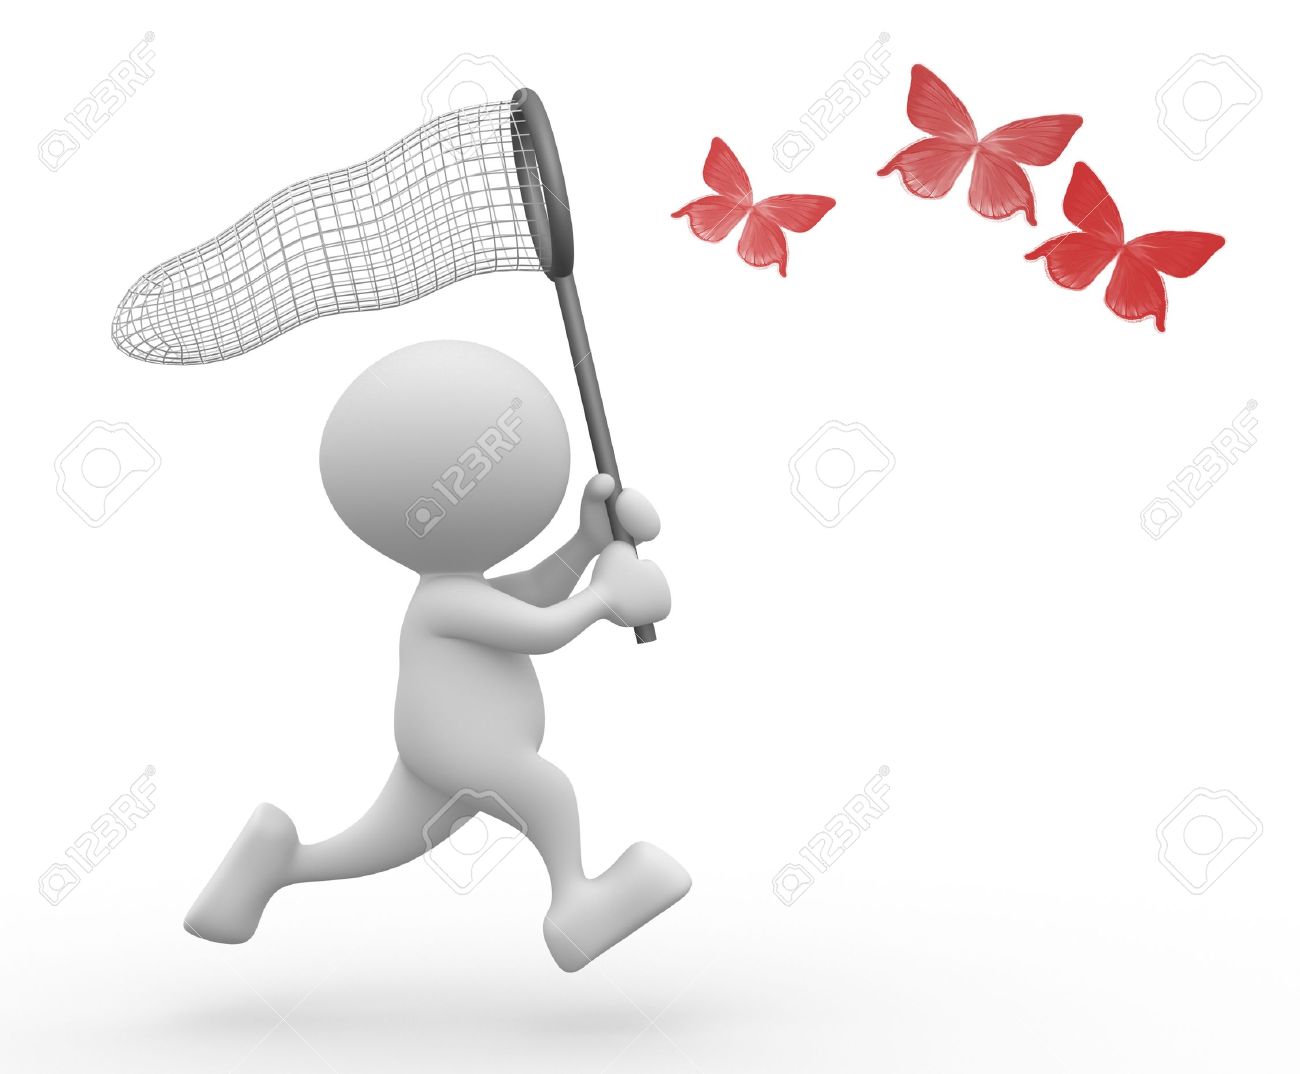 14967172-3d-people-man-person-and-catching-butterfly-with-net-Stock-Photo.jpg